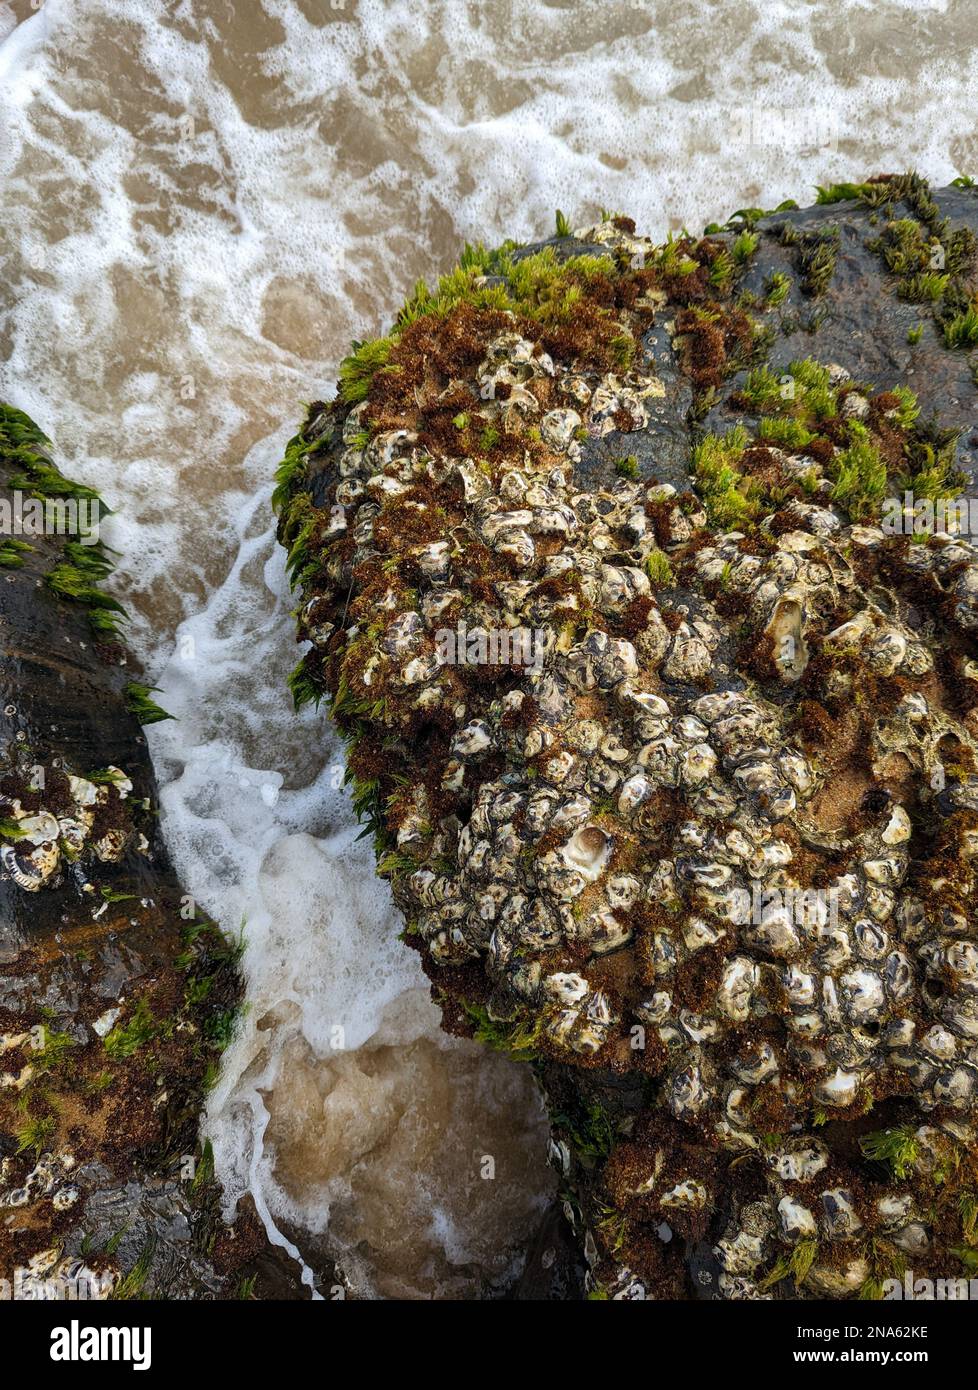 oyster clams and barnacles on the edge of a rock in a beach at low tide in the summer season Stock Photo